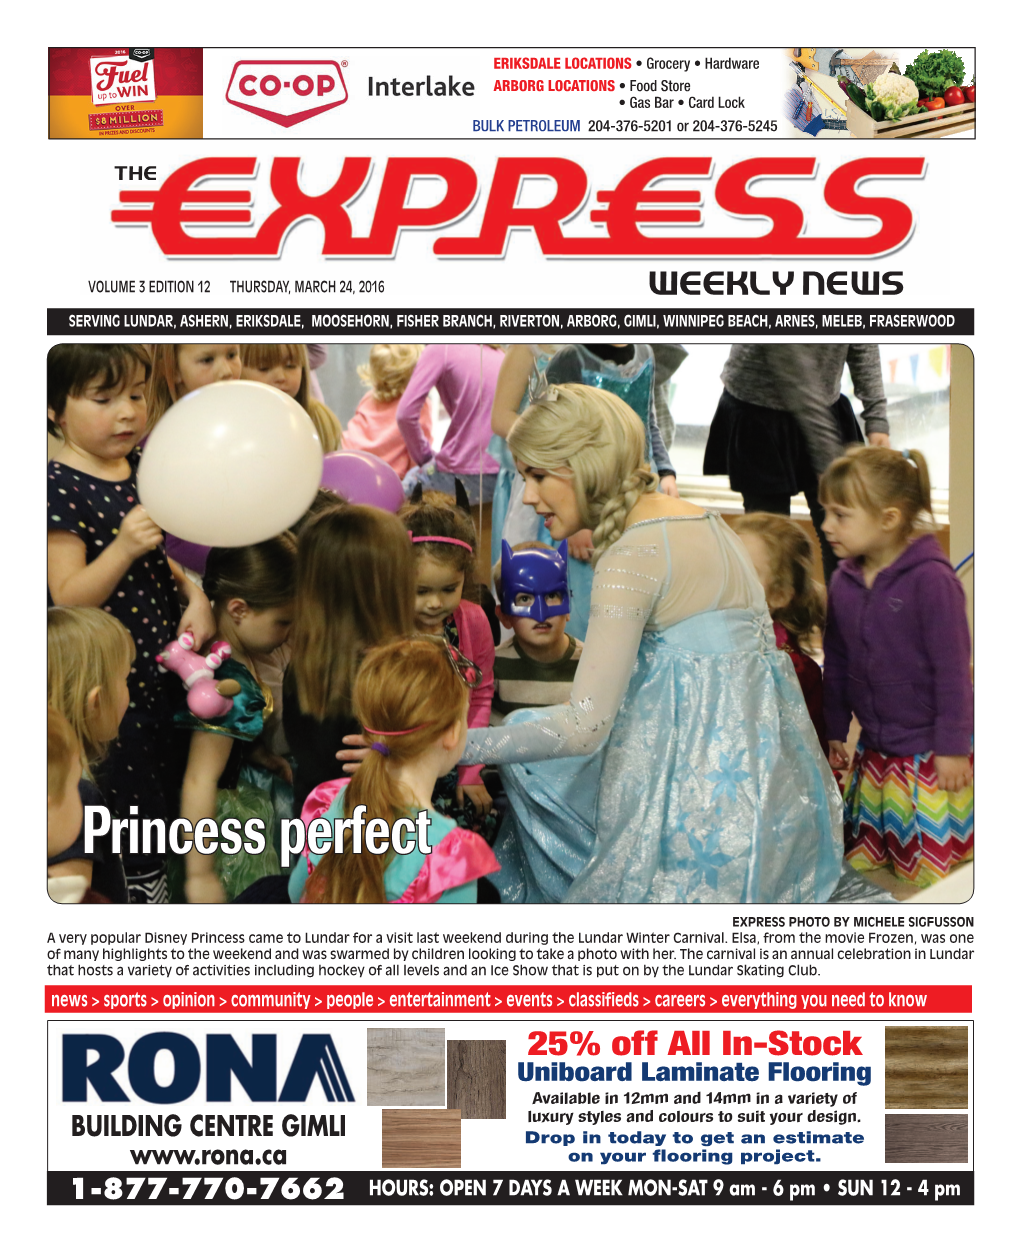 Express Weekly News 032416-Proofed.Indd